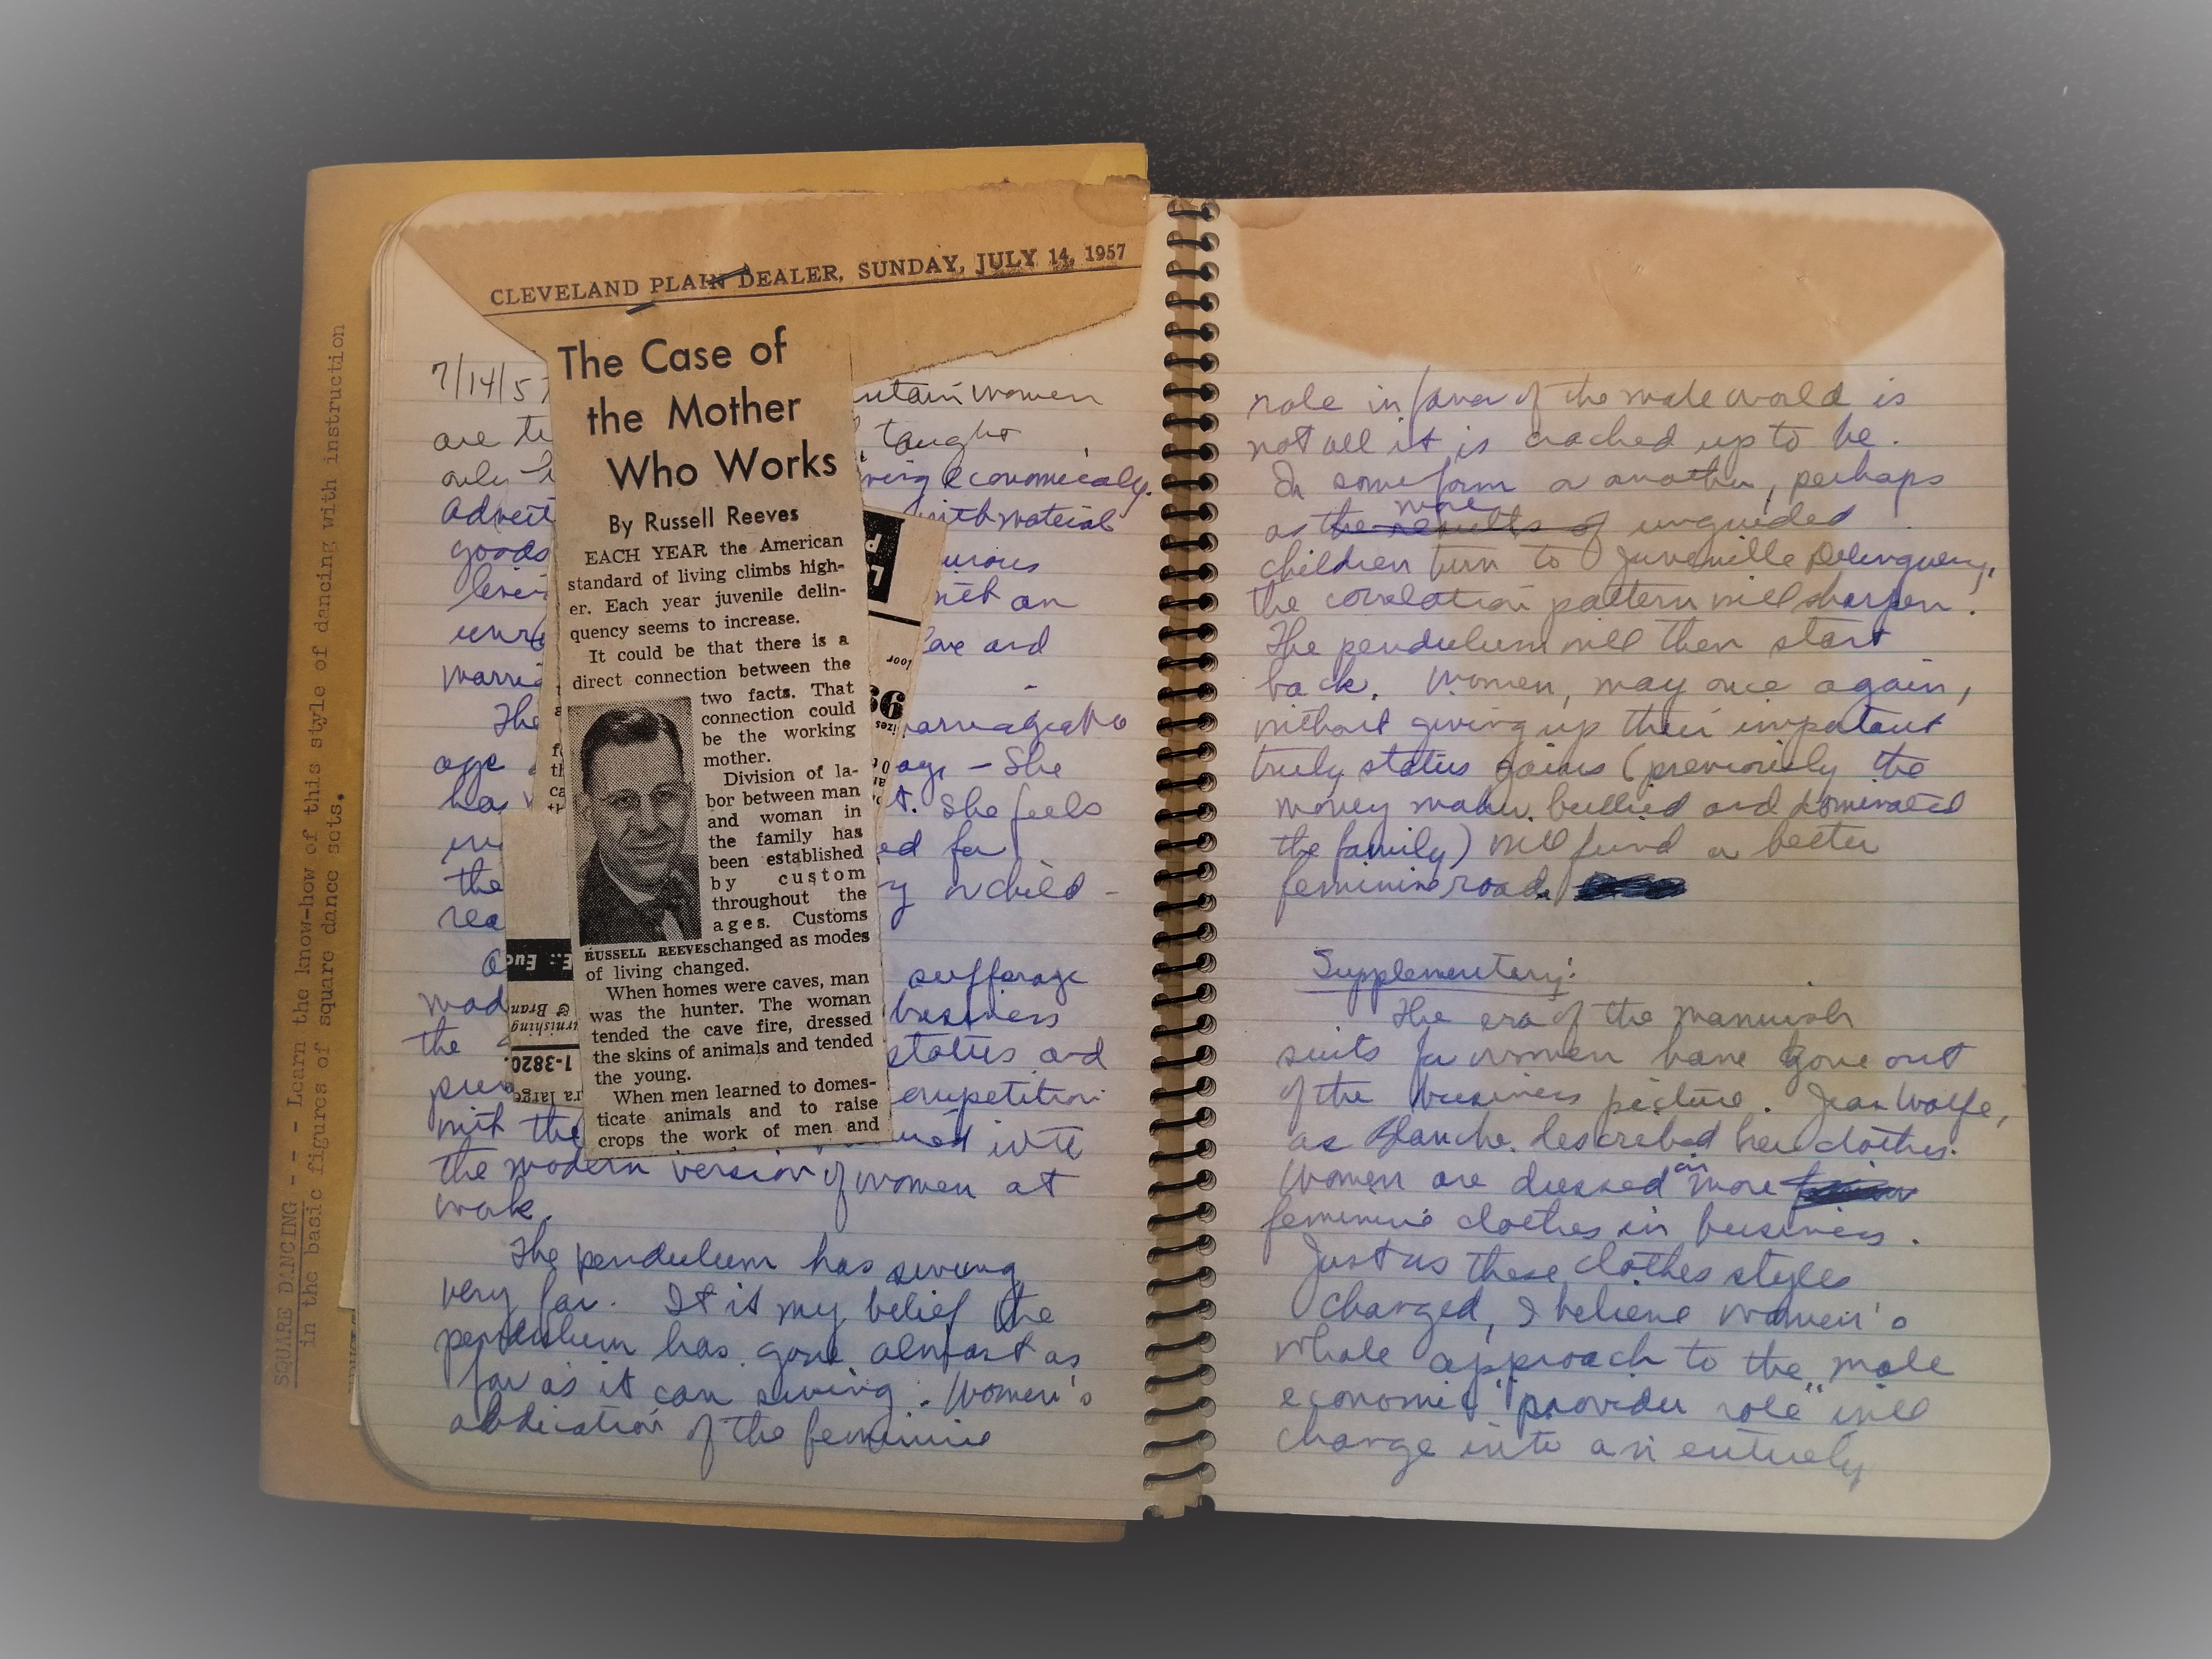 JOZ Journal Entry first two pages for 14 July 1957